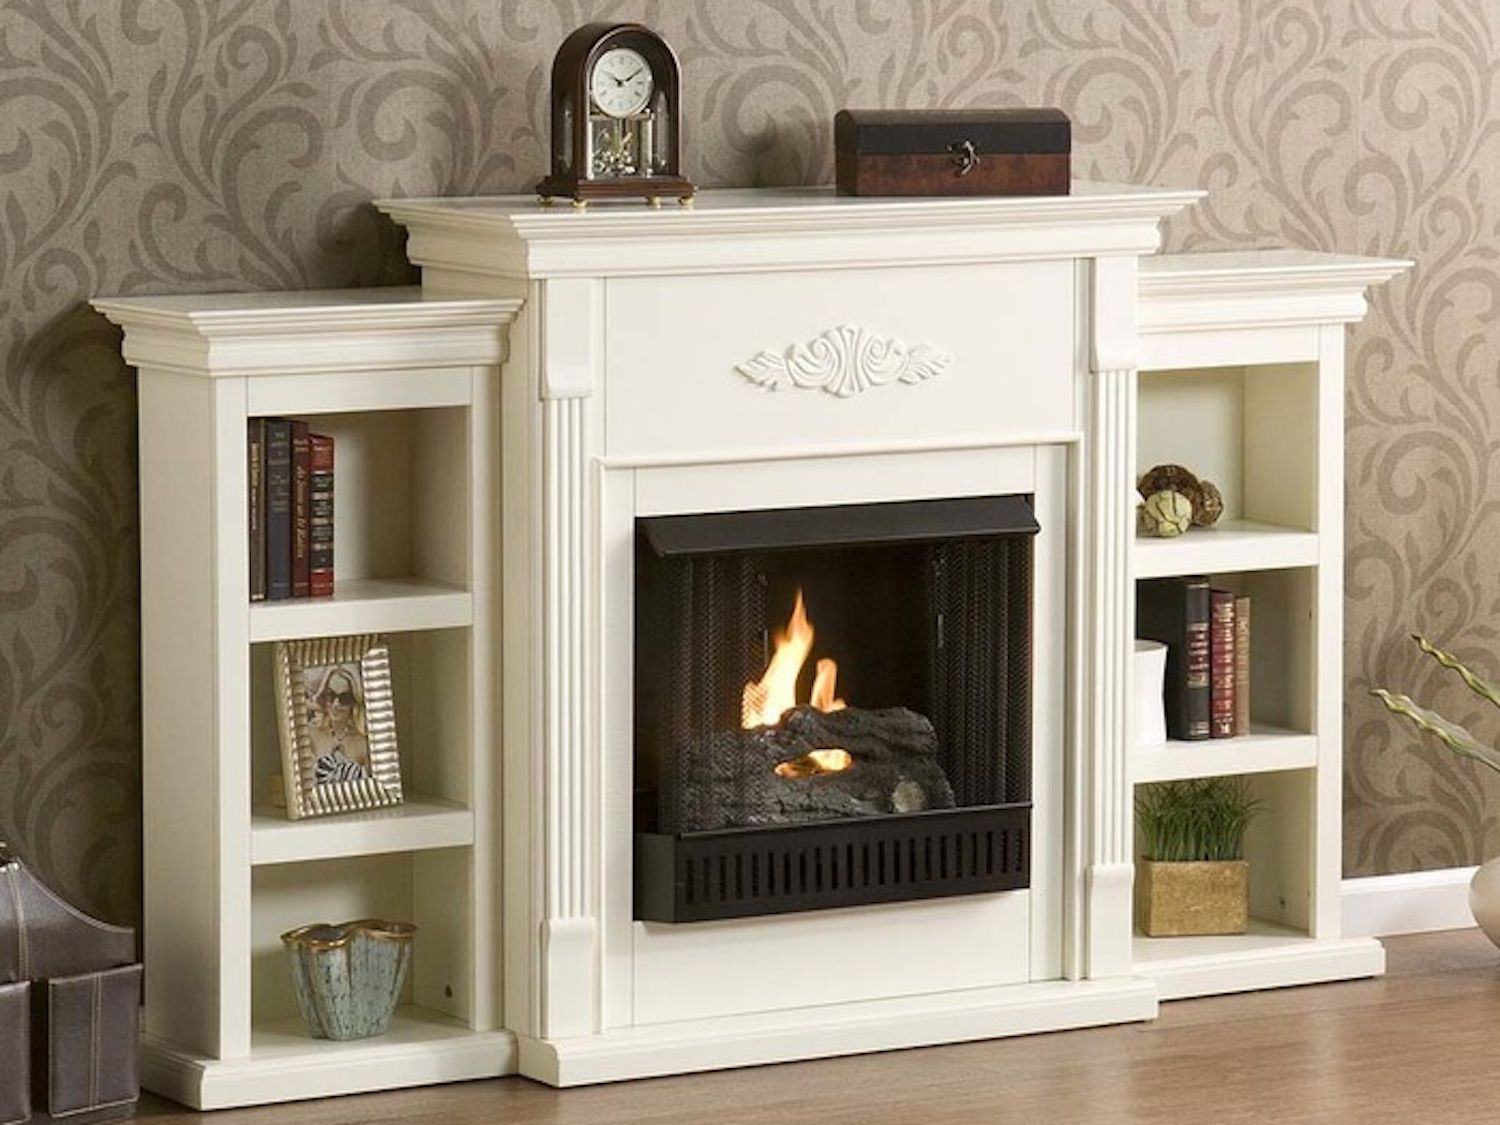 Real Flame Corner Fireplace Lovely How to Use Gel Fuel Fireplaces Indoors or Outdoors